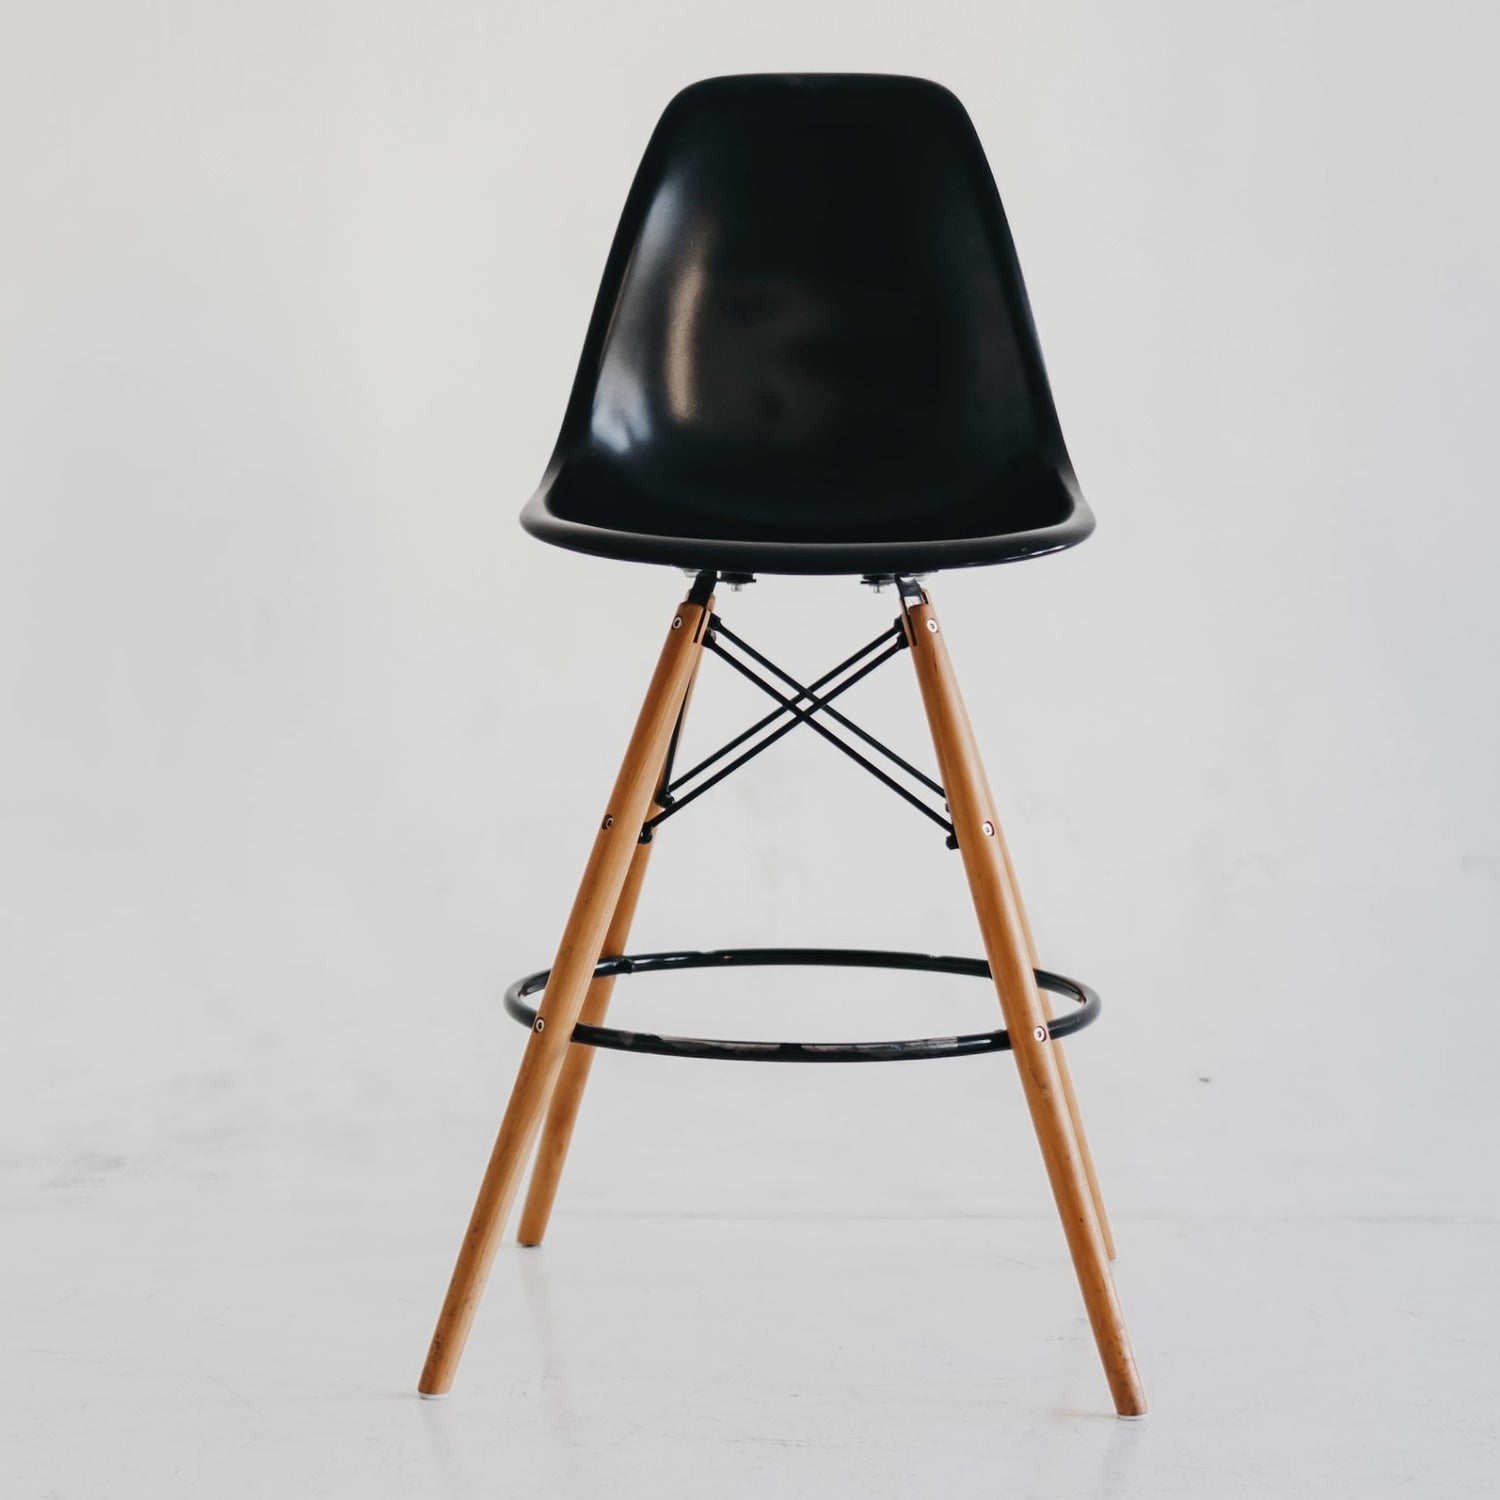 Chair Leg Covers: Protecting Your Timber Floors with Style and Functionality